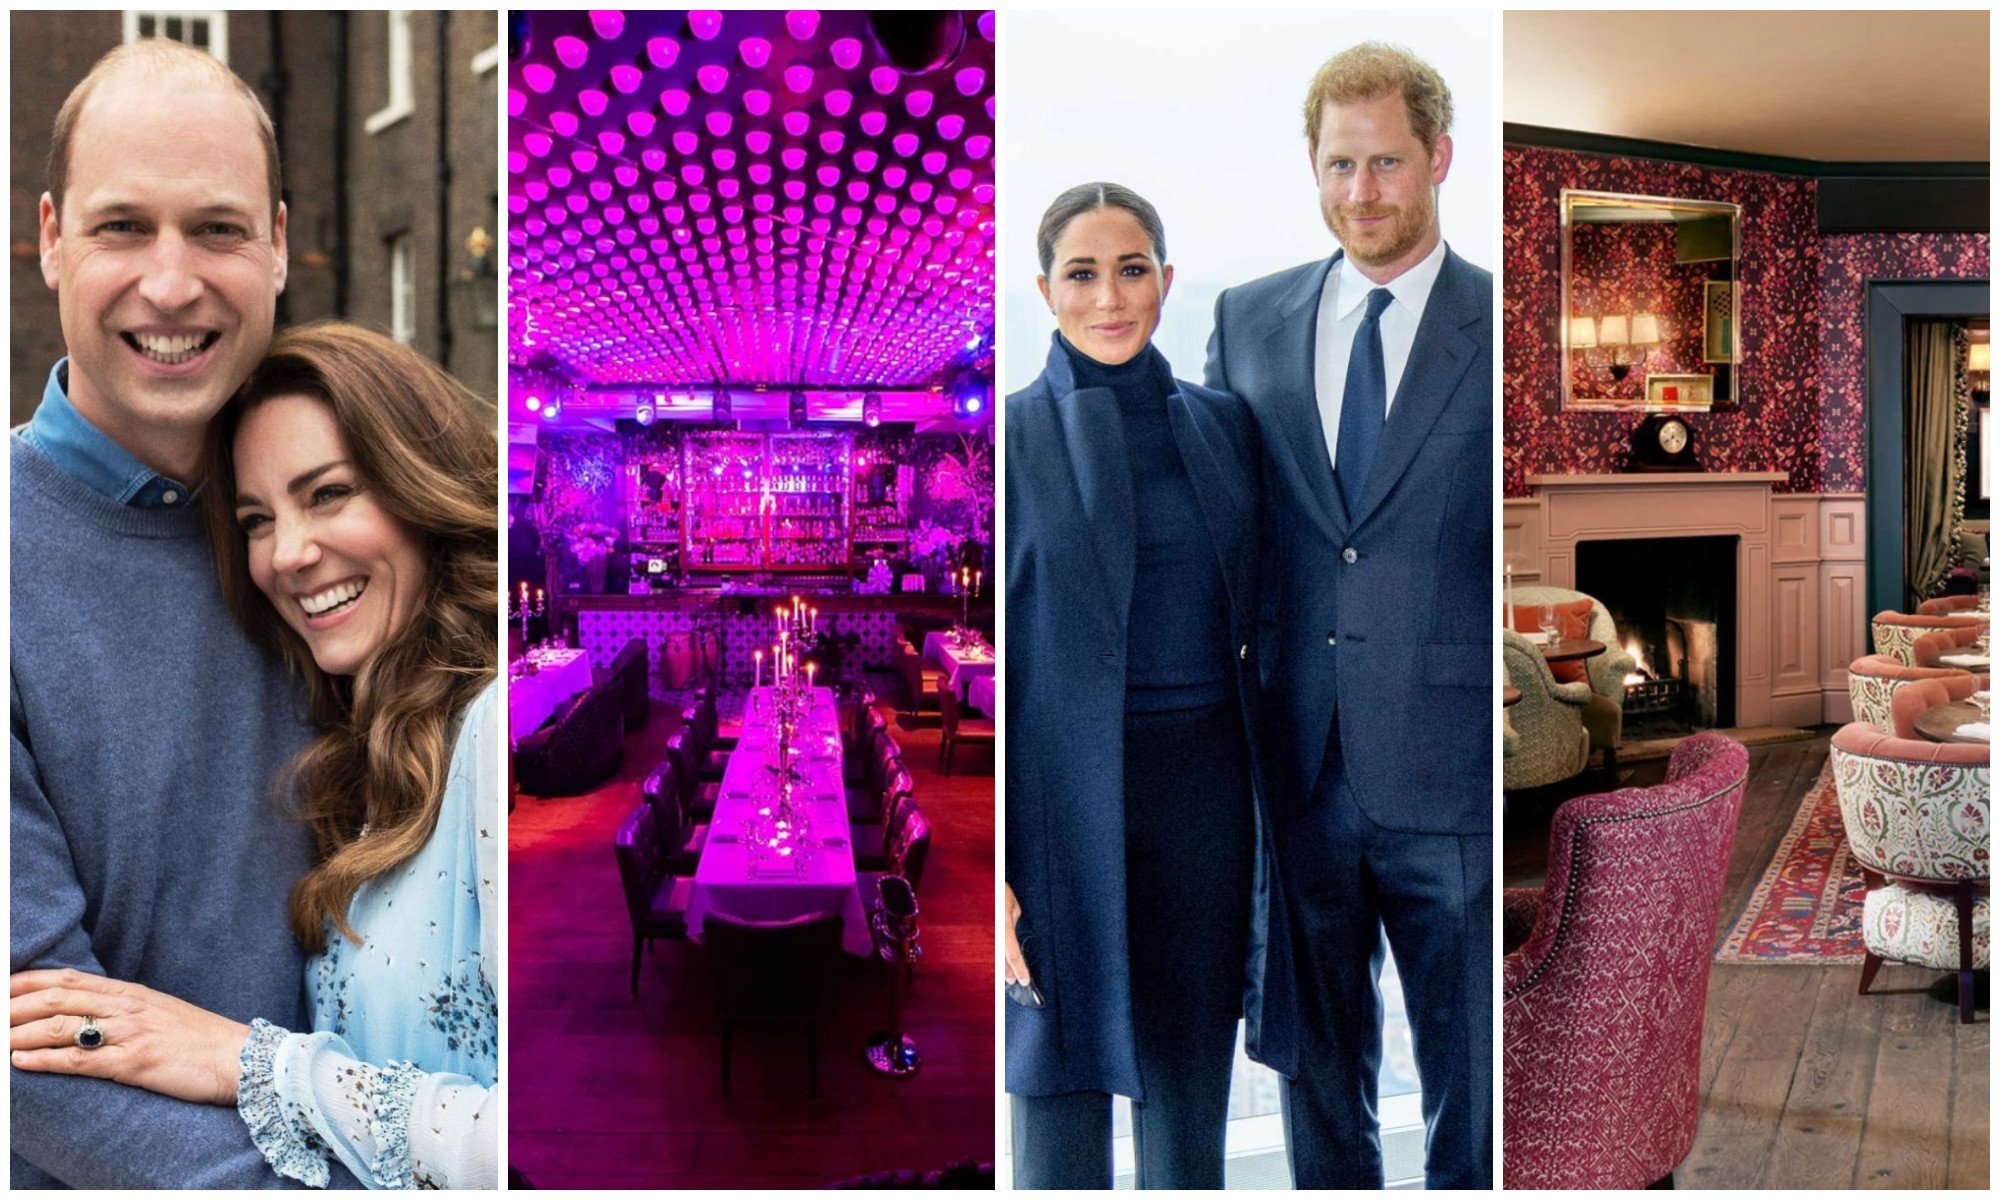 Prince William and Kate Middleton used to party at The Cuckoo Club while Meghan Markle and Prince Harry first met at Soho House. Photos: @dukeandduchessofcambridge/Instagram; The Cuckoo Club; AFP; Soho House